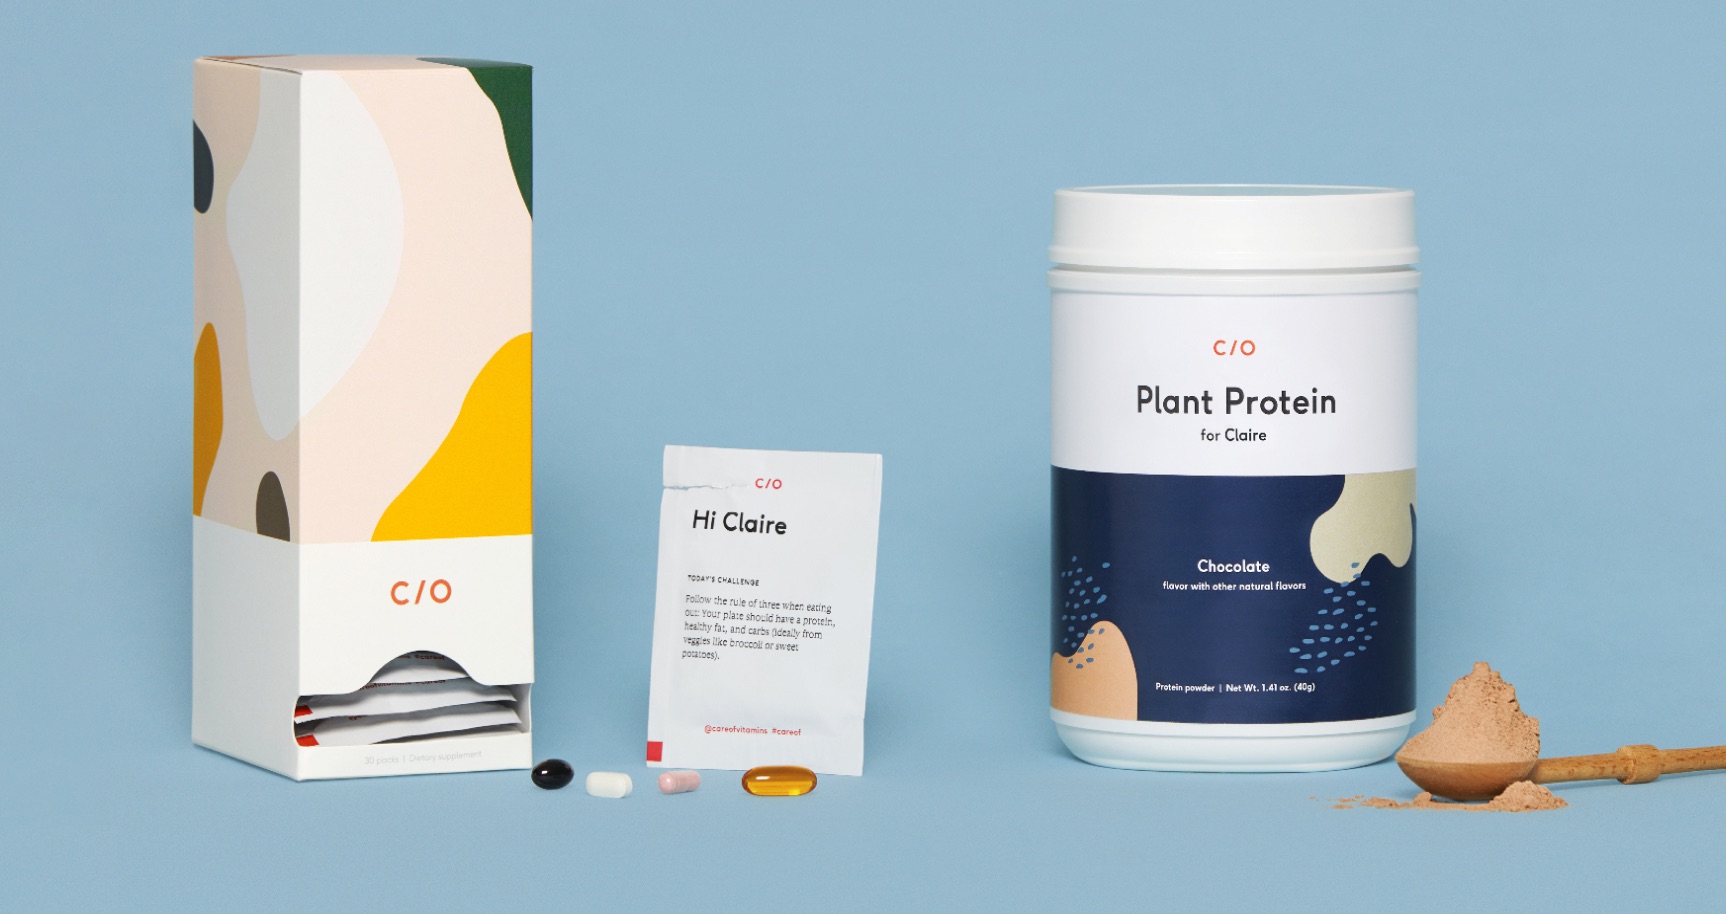 Personalized Packaging: A Genius Marketing Idea or a Waste of Time and Materials?